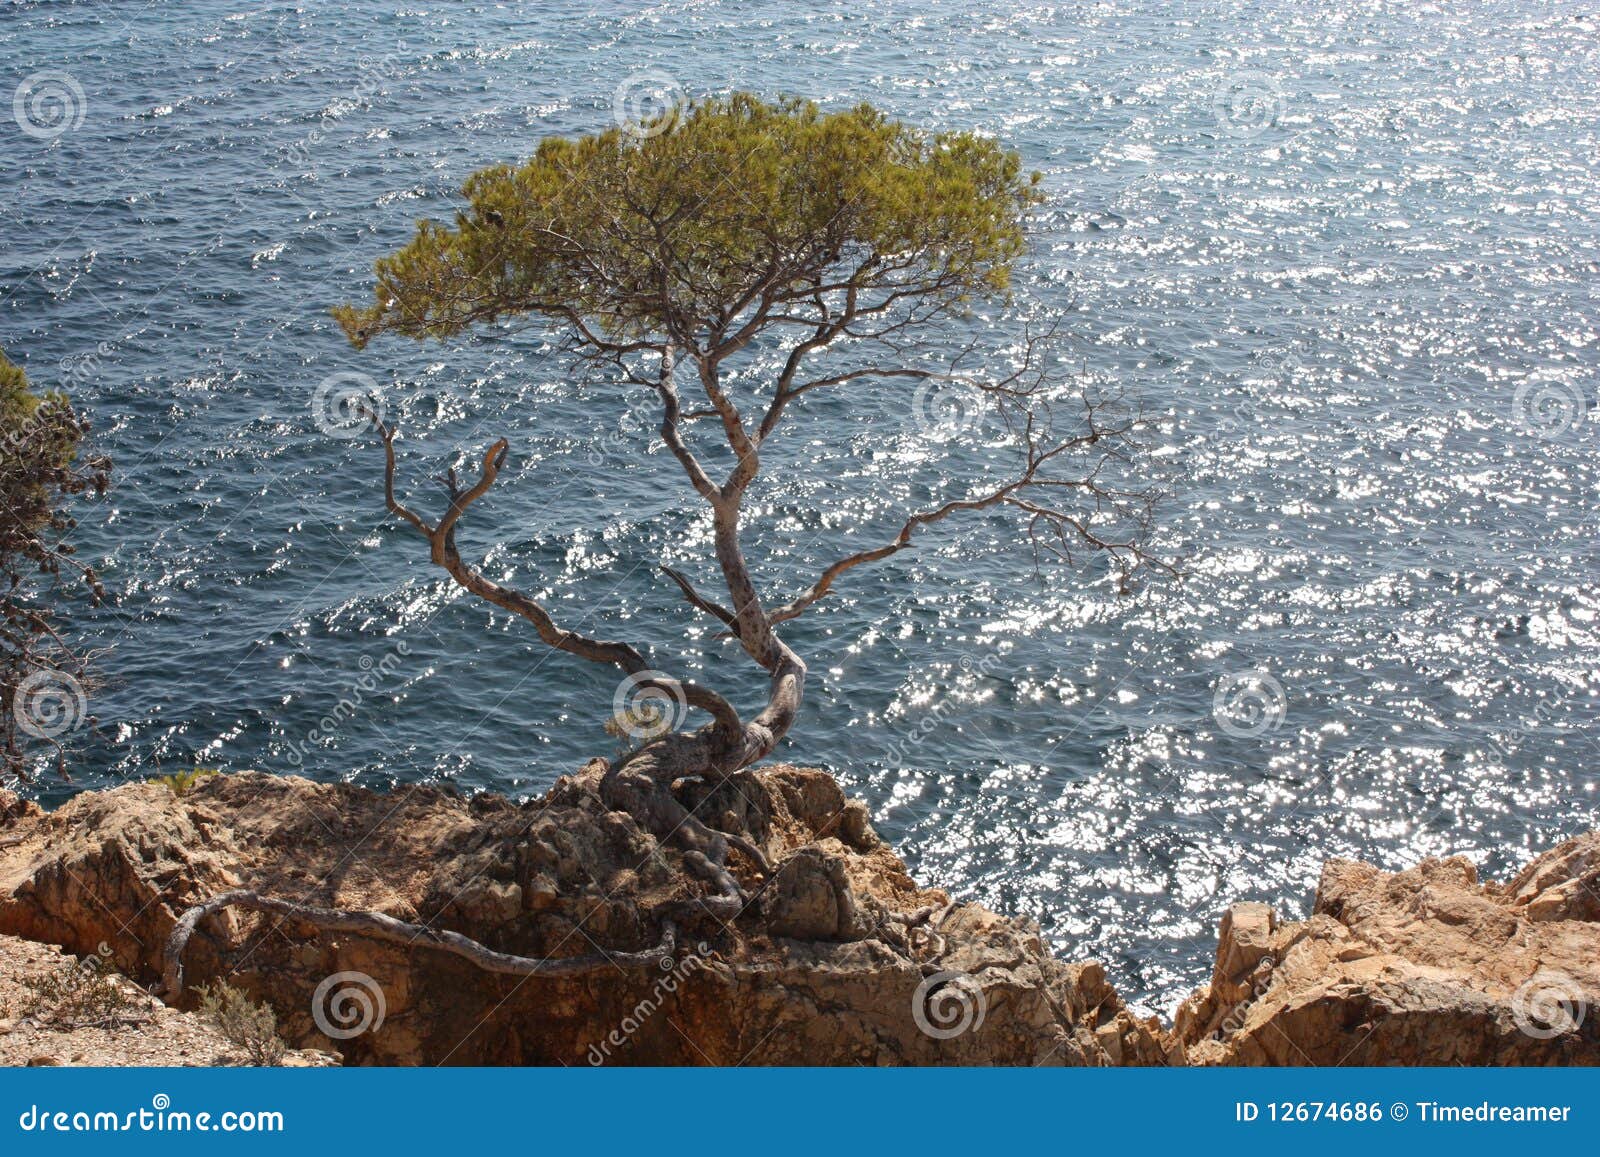 Pines beside the sea stock photo. Image of holidays, pines - 12674686